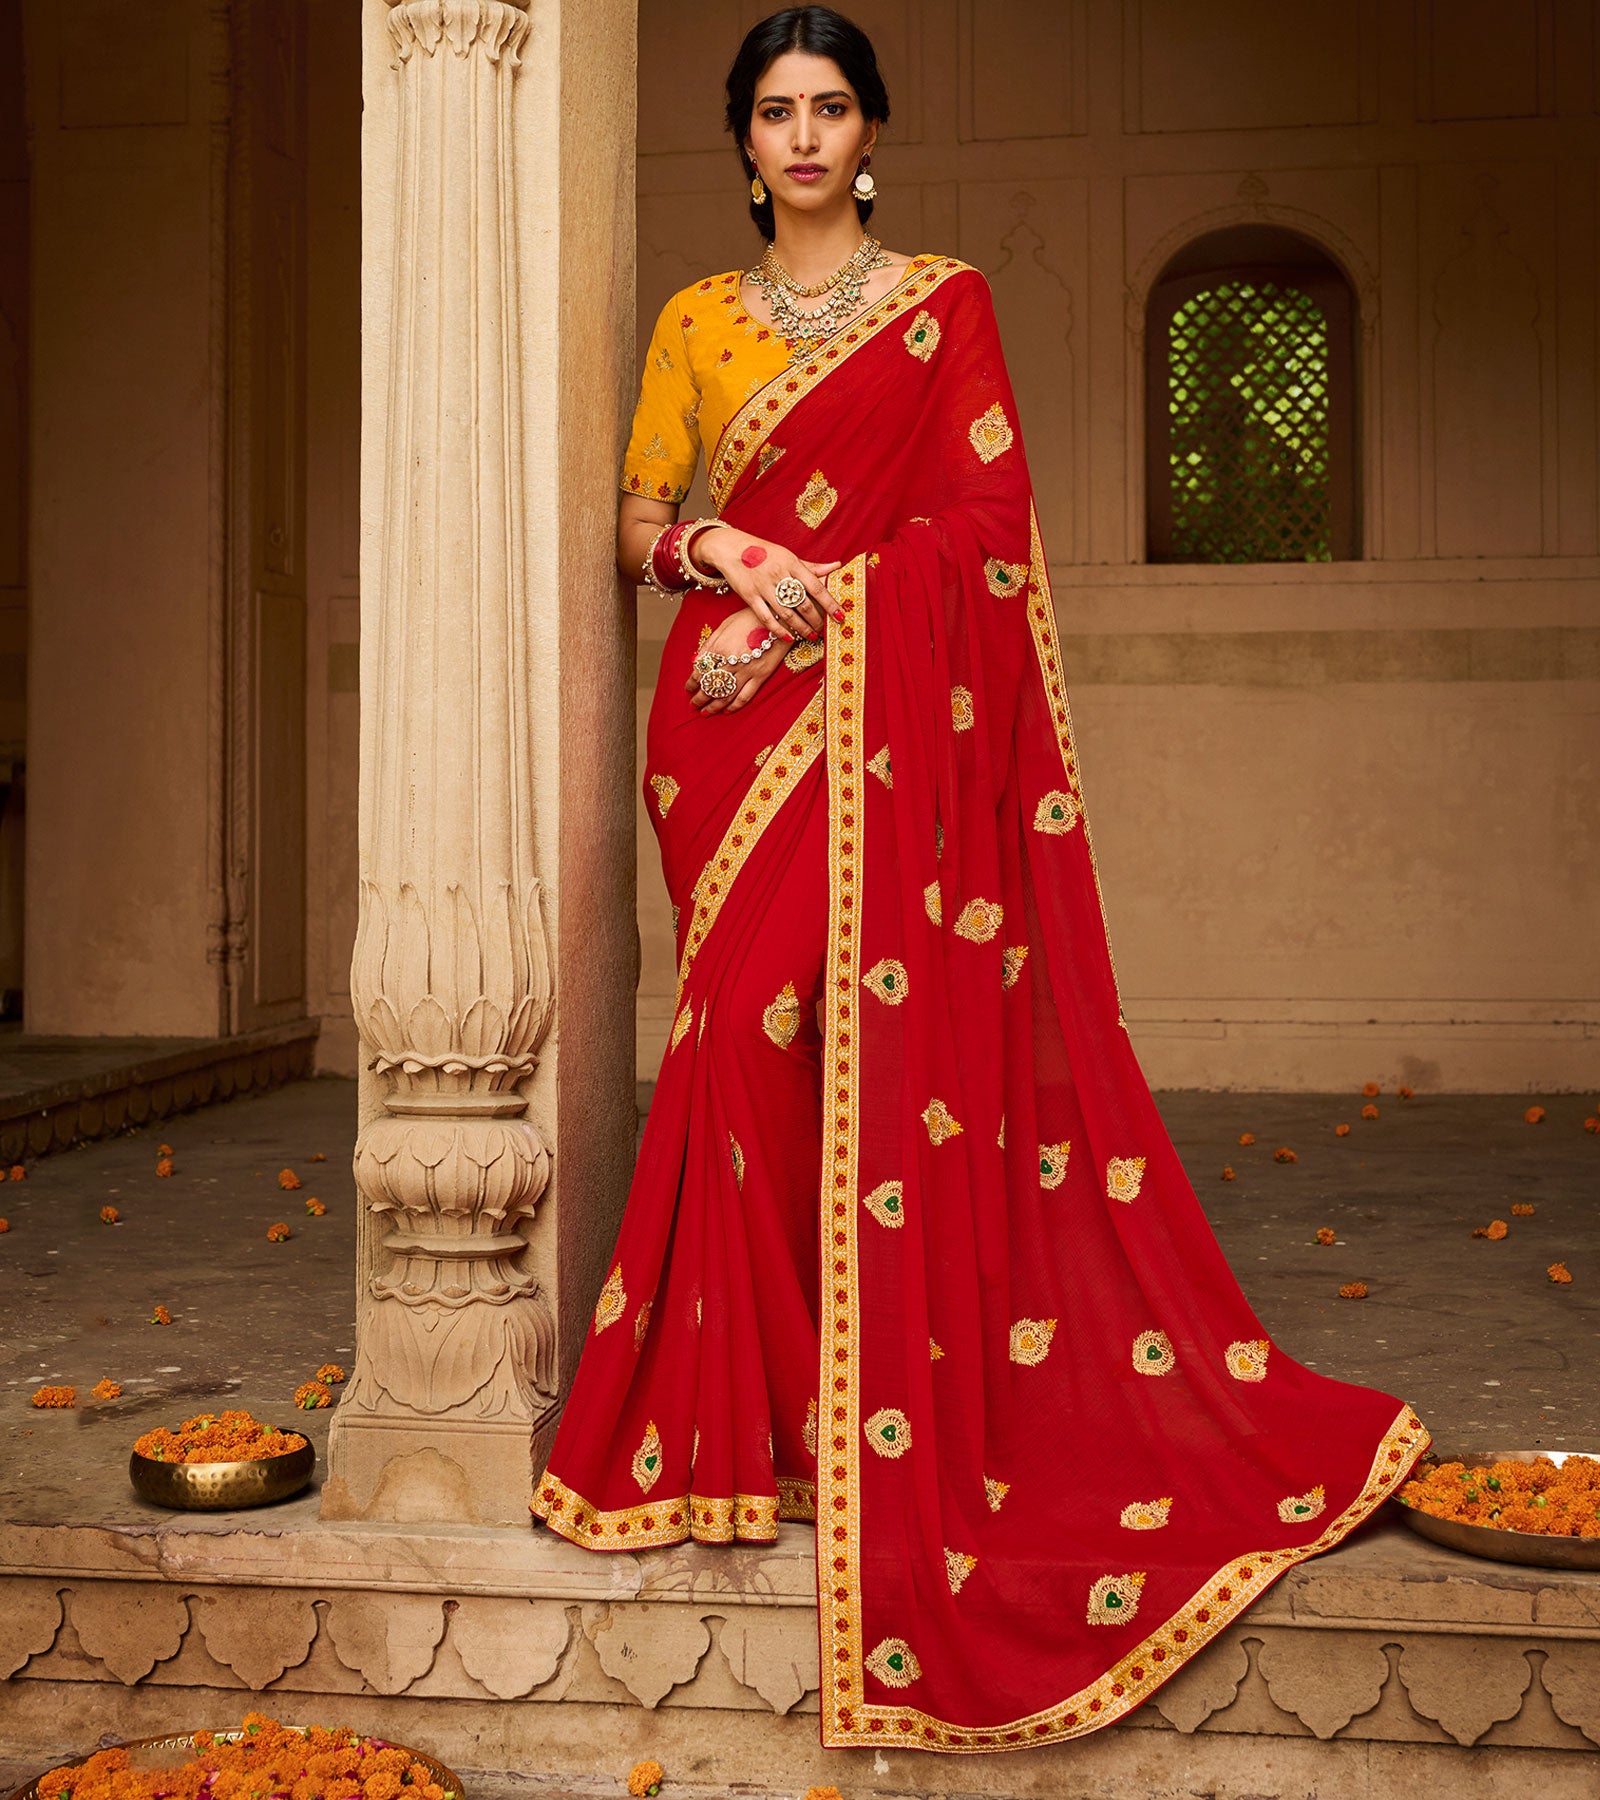 Buy RANGOLI ART Womens And Girls Georgette Fabric Saree With Zari Sequins  Embroidery Work Red Color Saree at Amazon.in